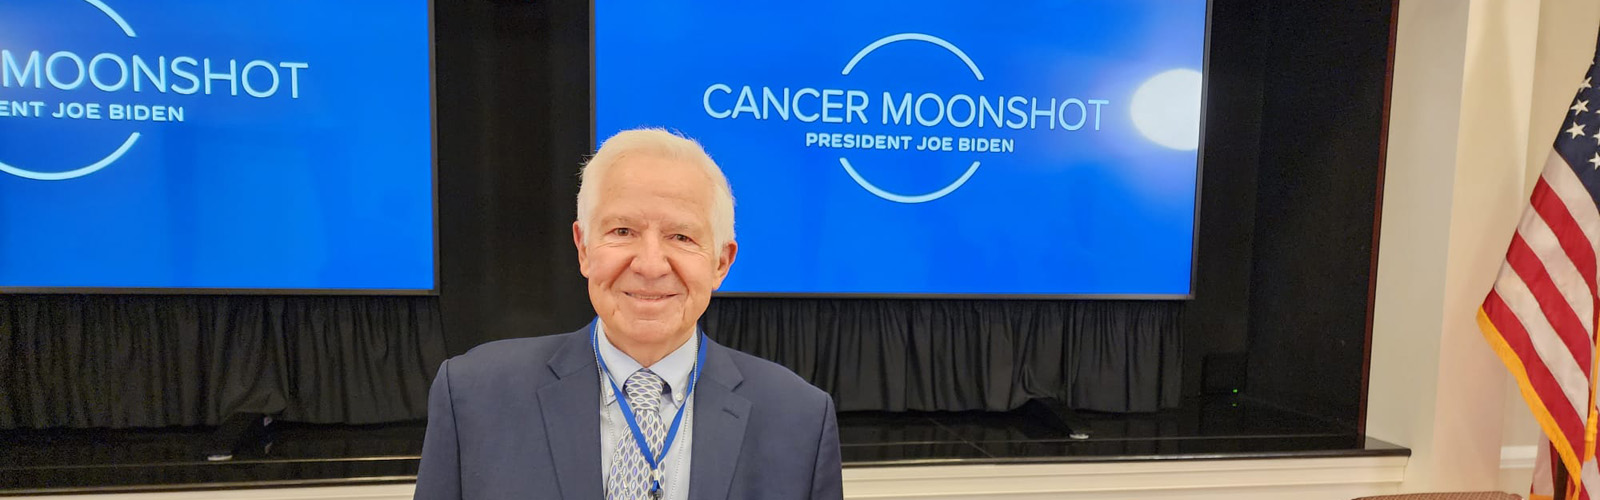 Dr. Michael Fiore was a special guest at the White House event for the Cancer Moonshot. 